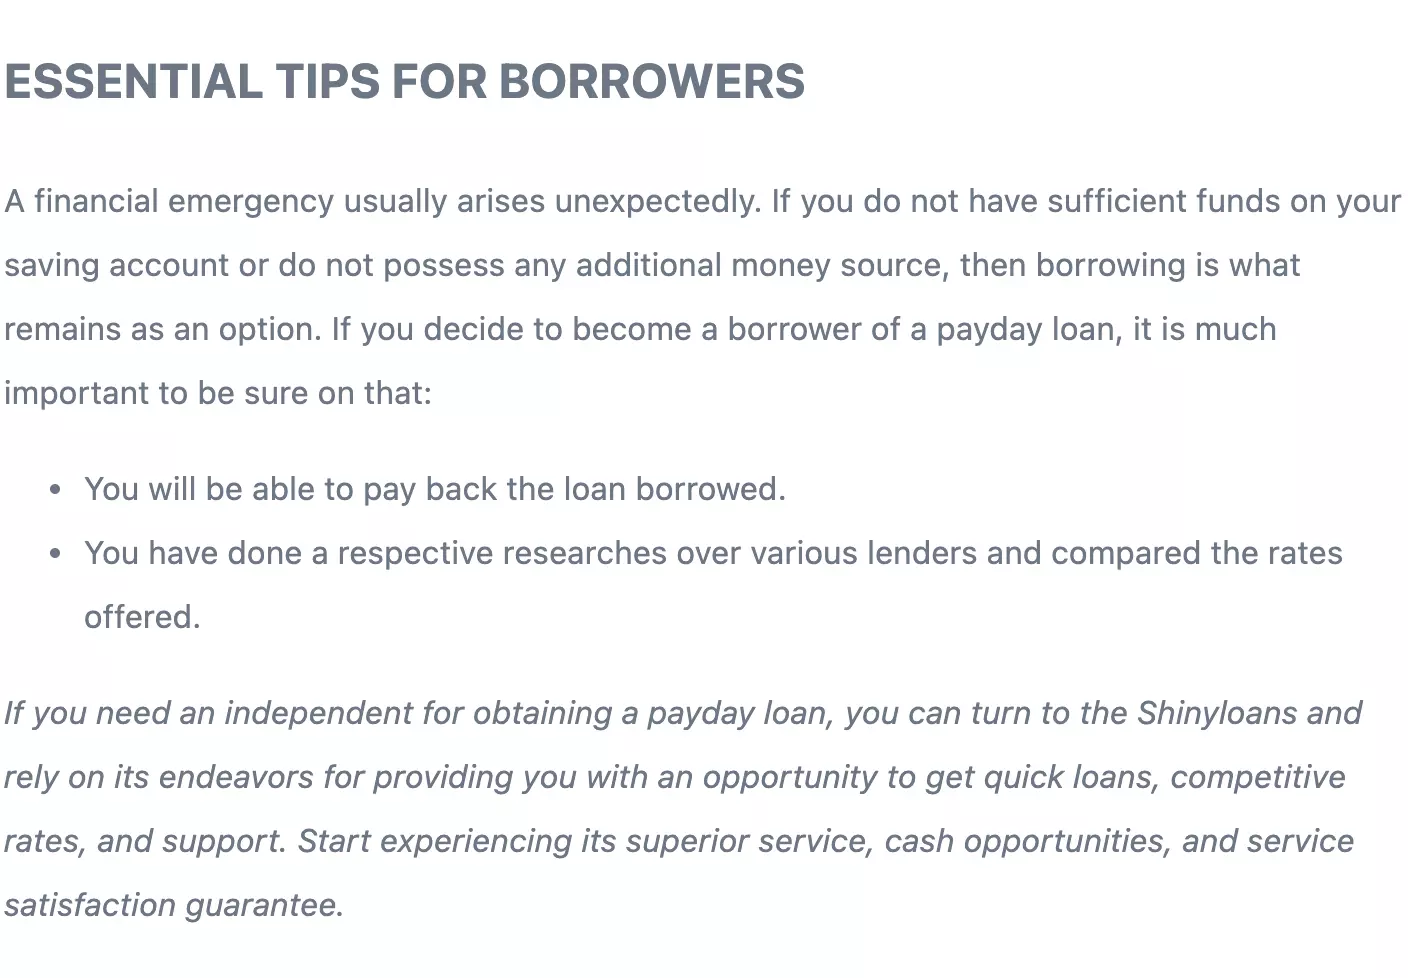 Essential Tips for borrowers